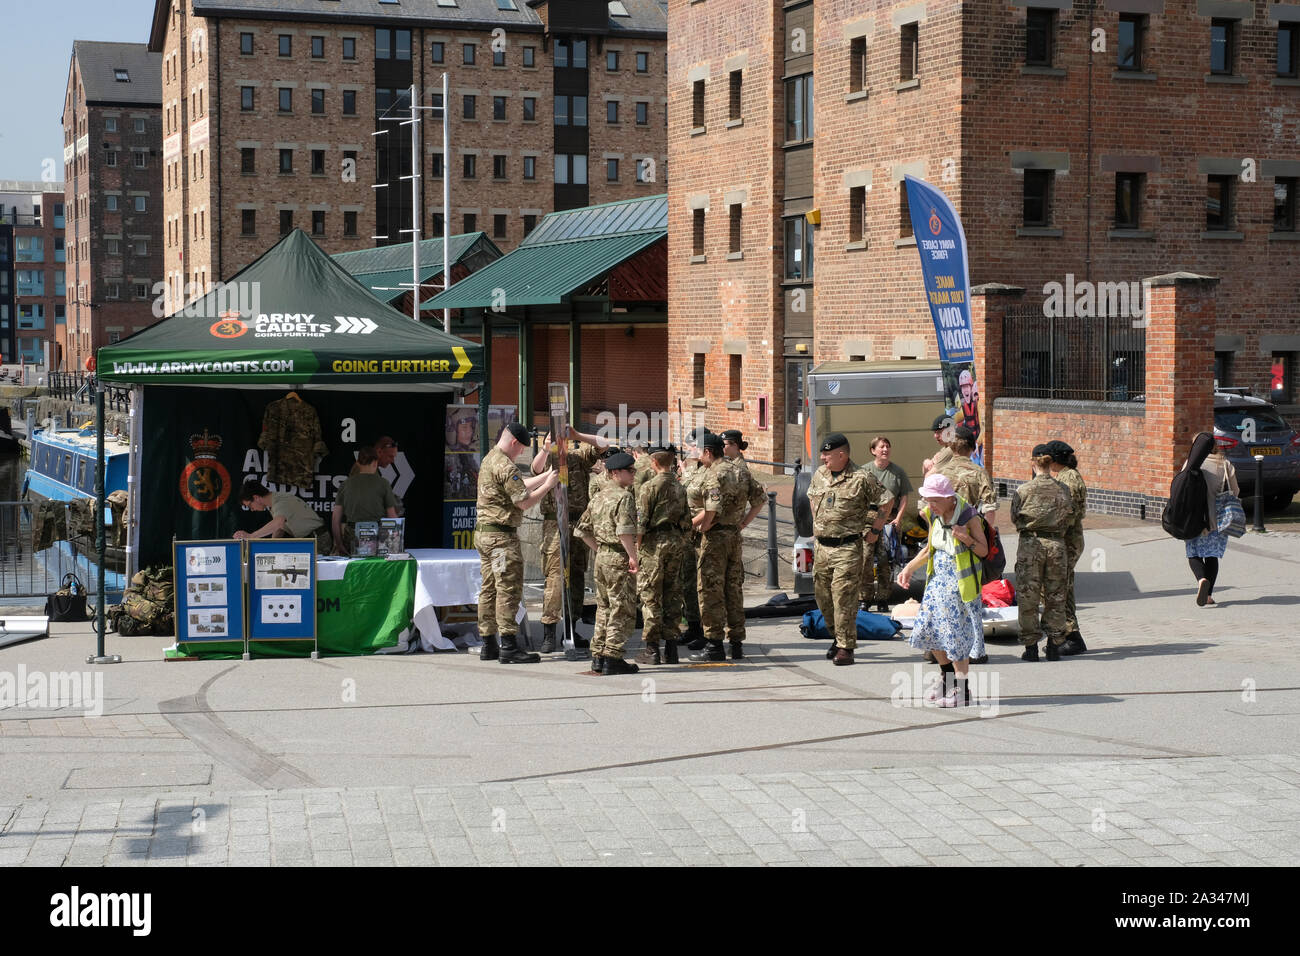 Celebration of Armed Forces Day in Gloucester Docks, southern England Stock Photo